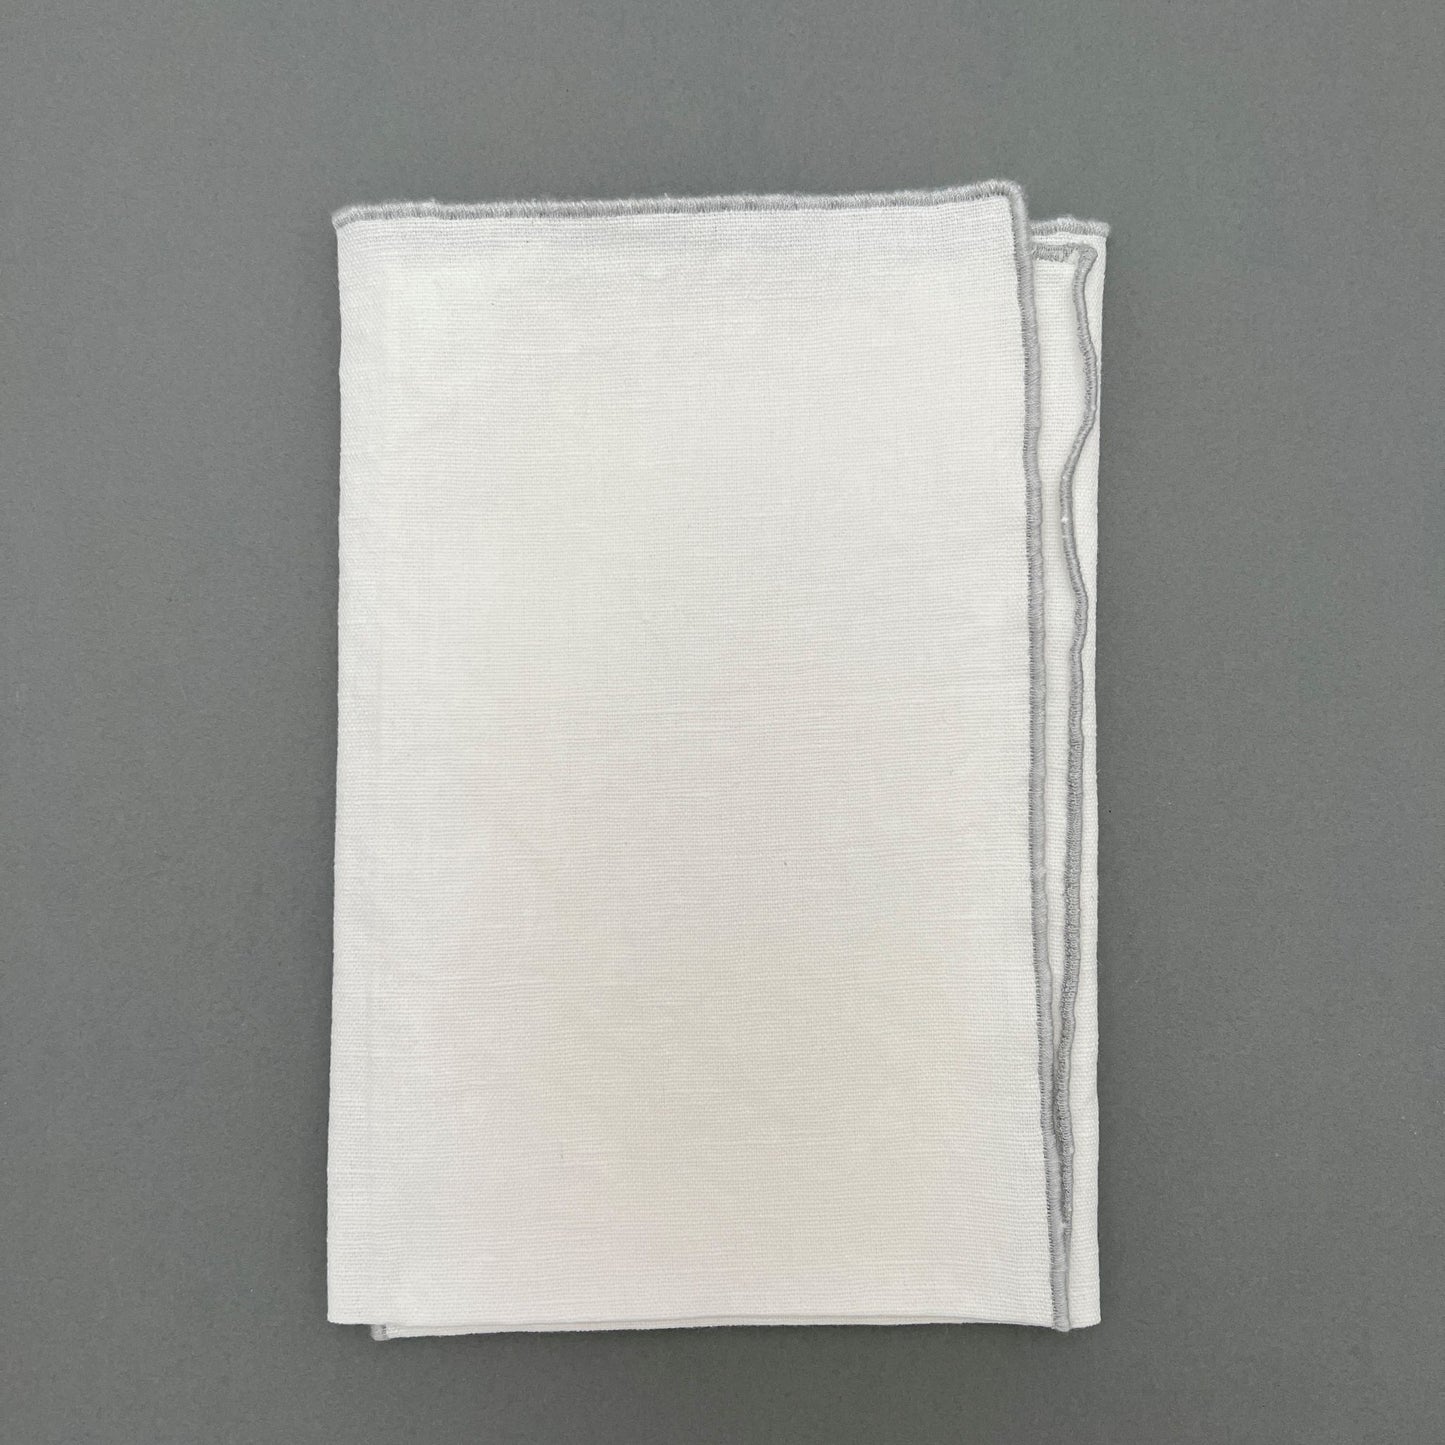 A folded white napkin with a gray sewn outline laying on a gray background